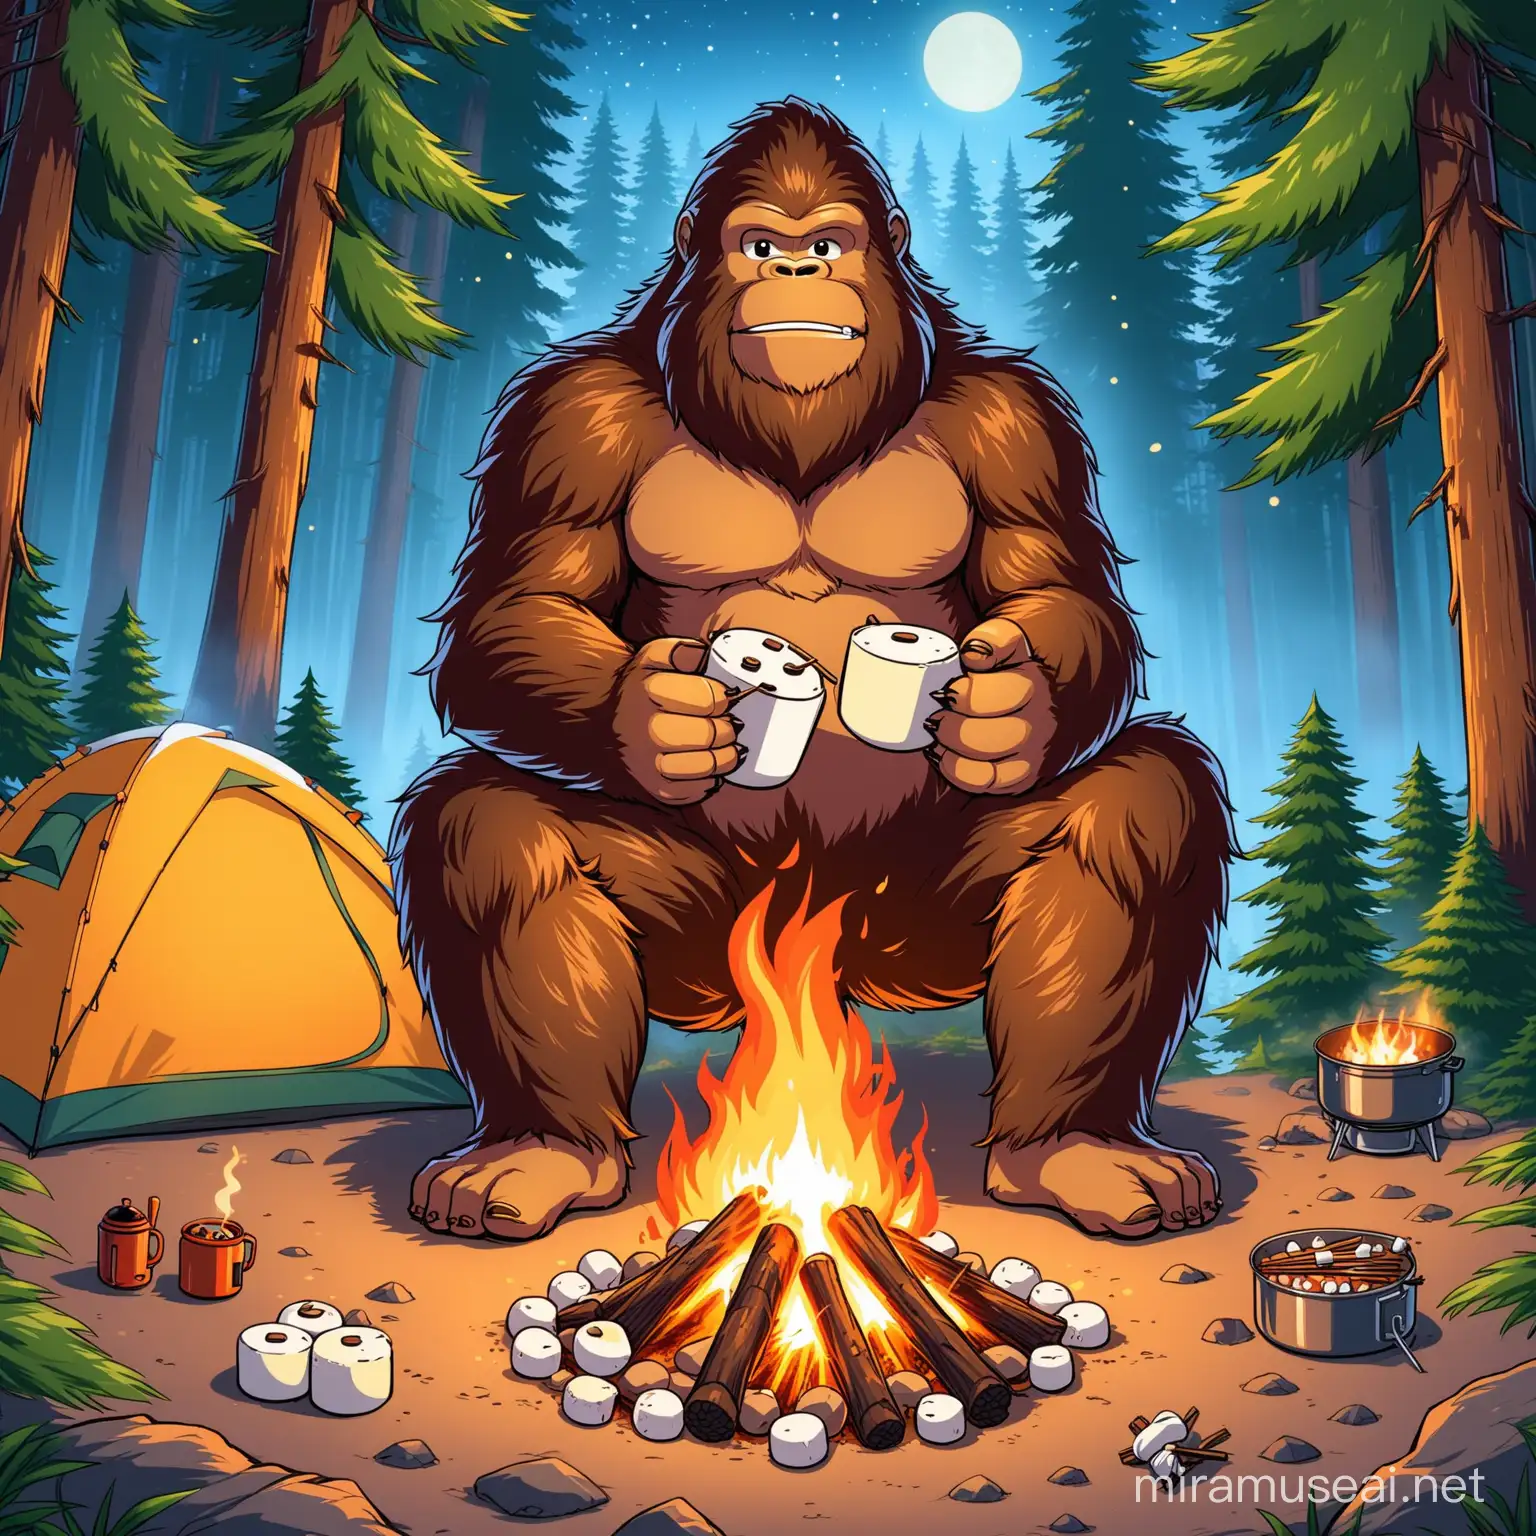 Bigfoot Camping and he is roasting marshmallows around a fire.